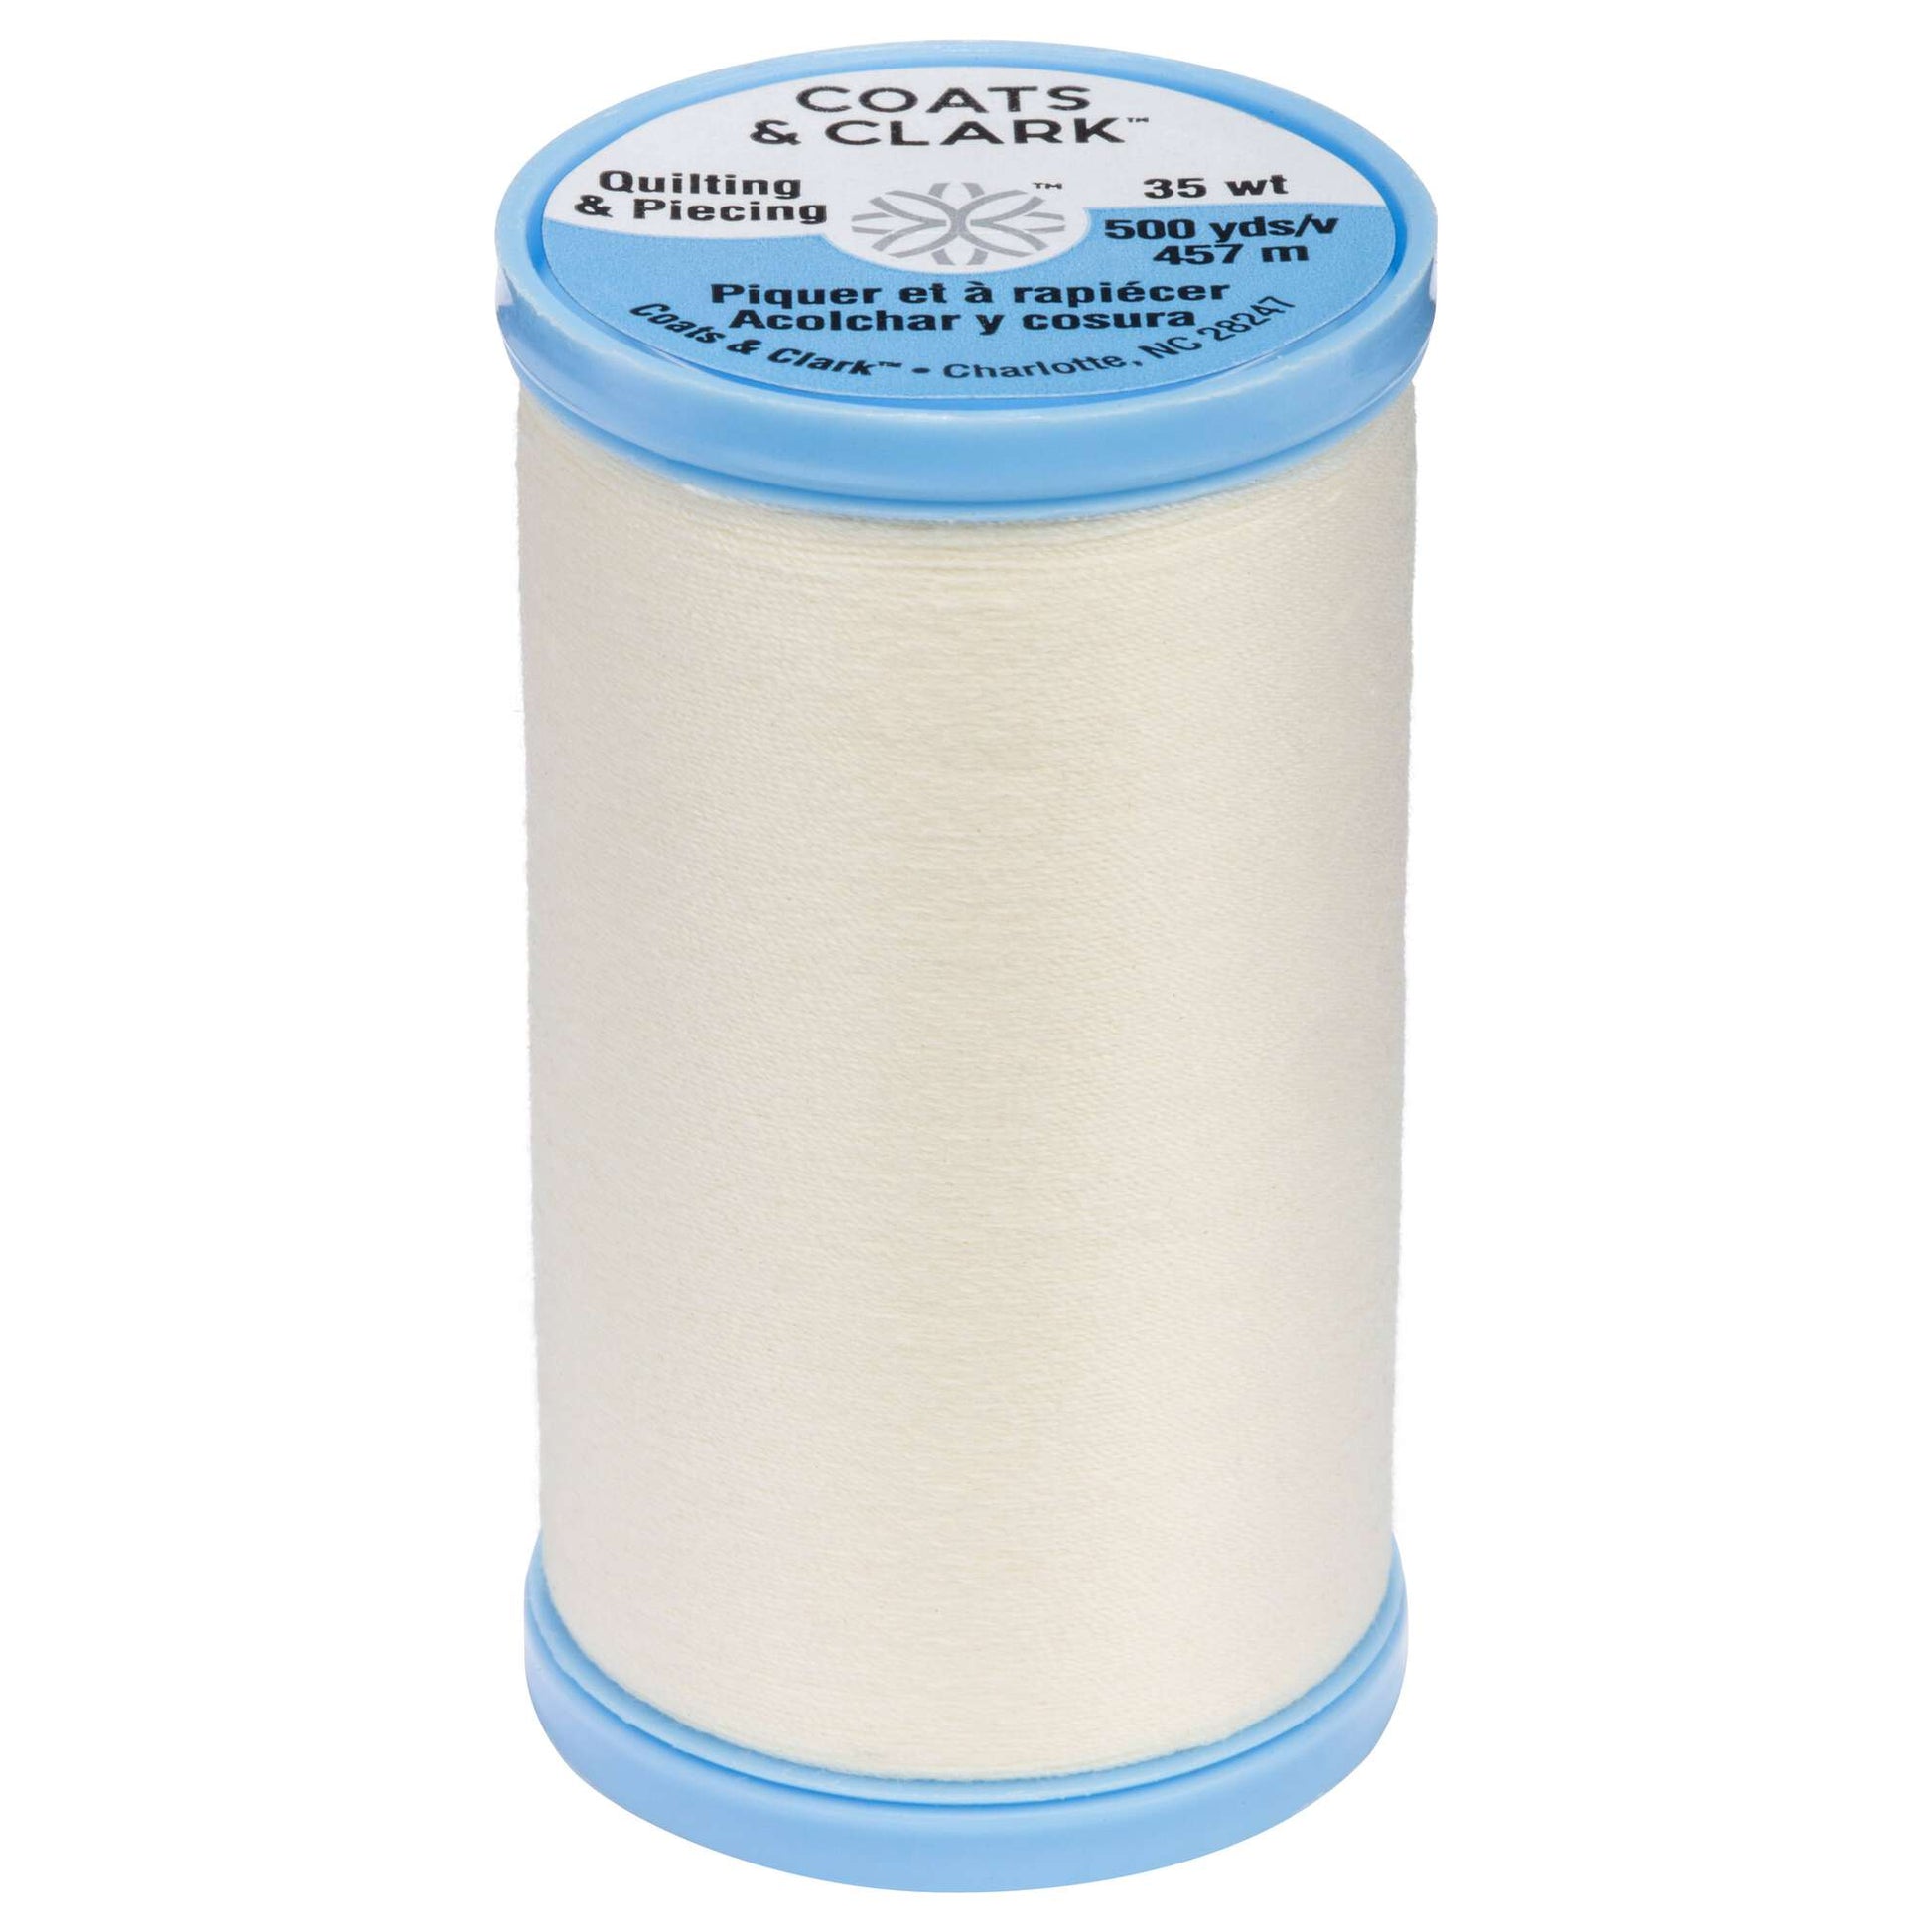 Coats & Clark Cotton Covered Quilting & Piecing Thread (500 Yards) Pearl